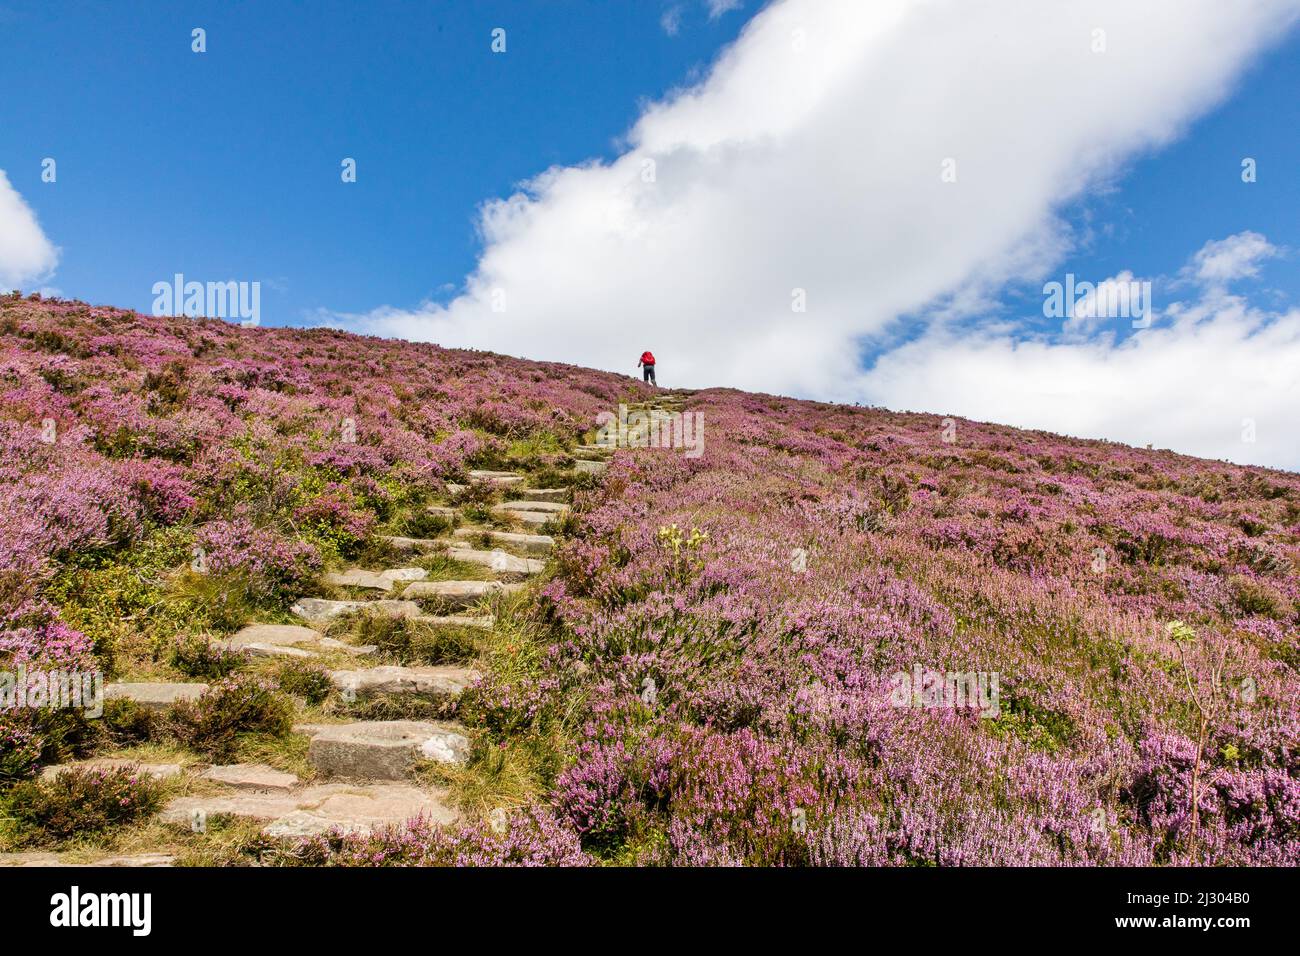 Ryvoan Walk, Meall a &#39;Bhuachaille, footpath with stone steps, bright purple, pink, flowering heather, Glenmore Forest Park, Cairngorms National Park, Scotland, UK Stock Photo